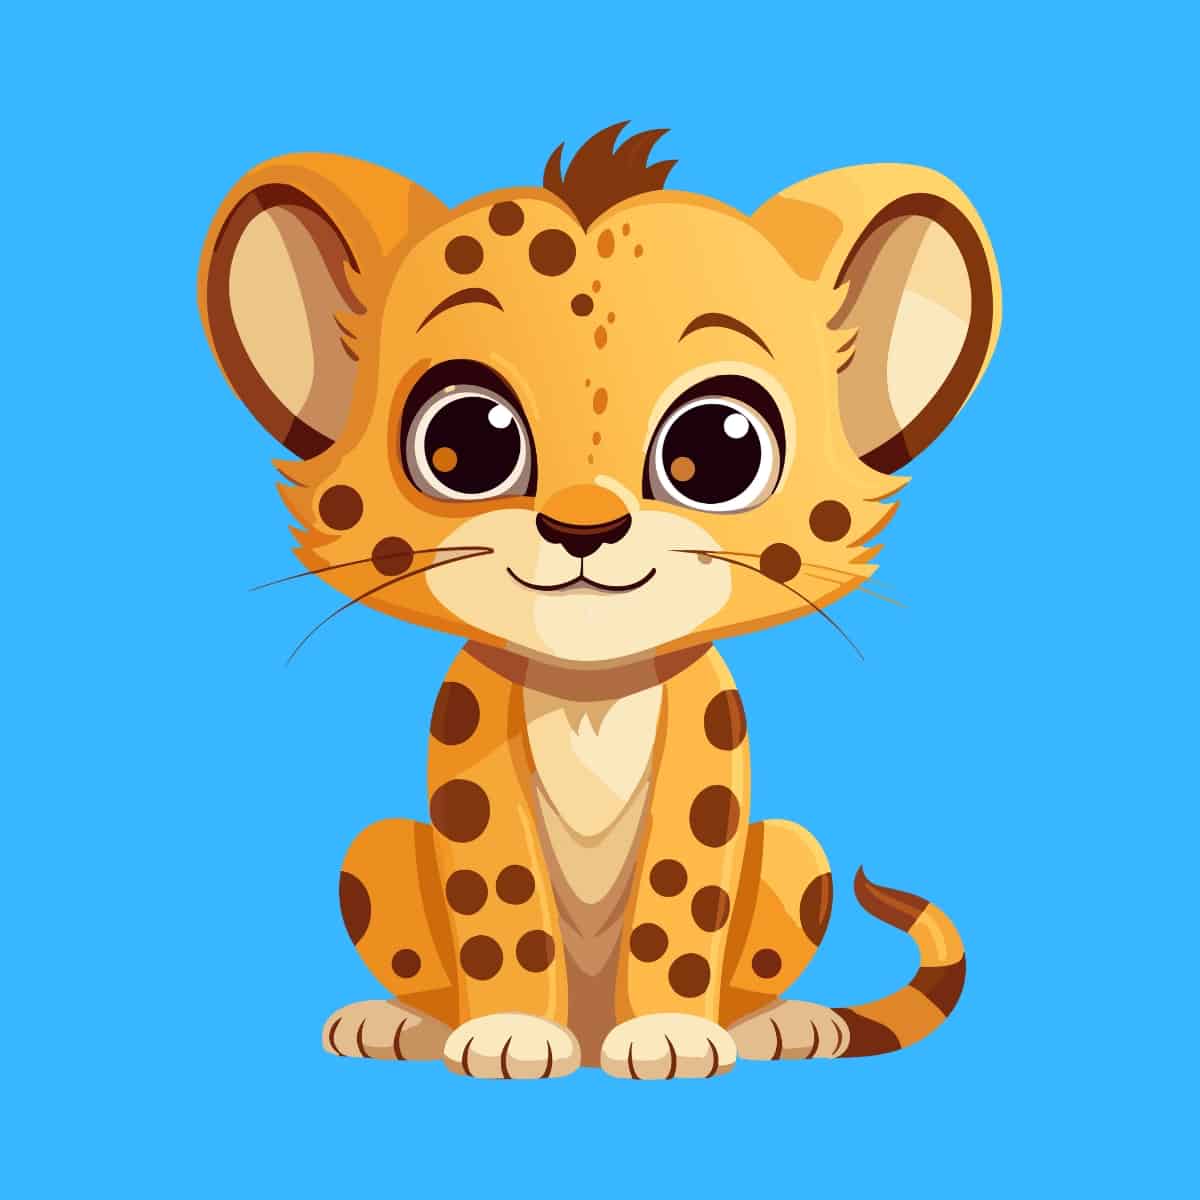 Cartoon graphic of a young cute cheetah sitting on a blue background.